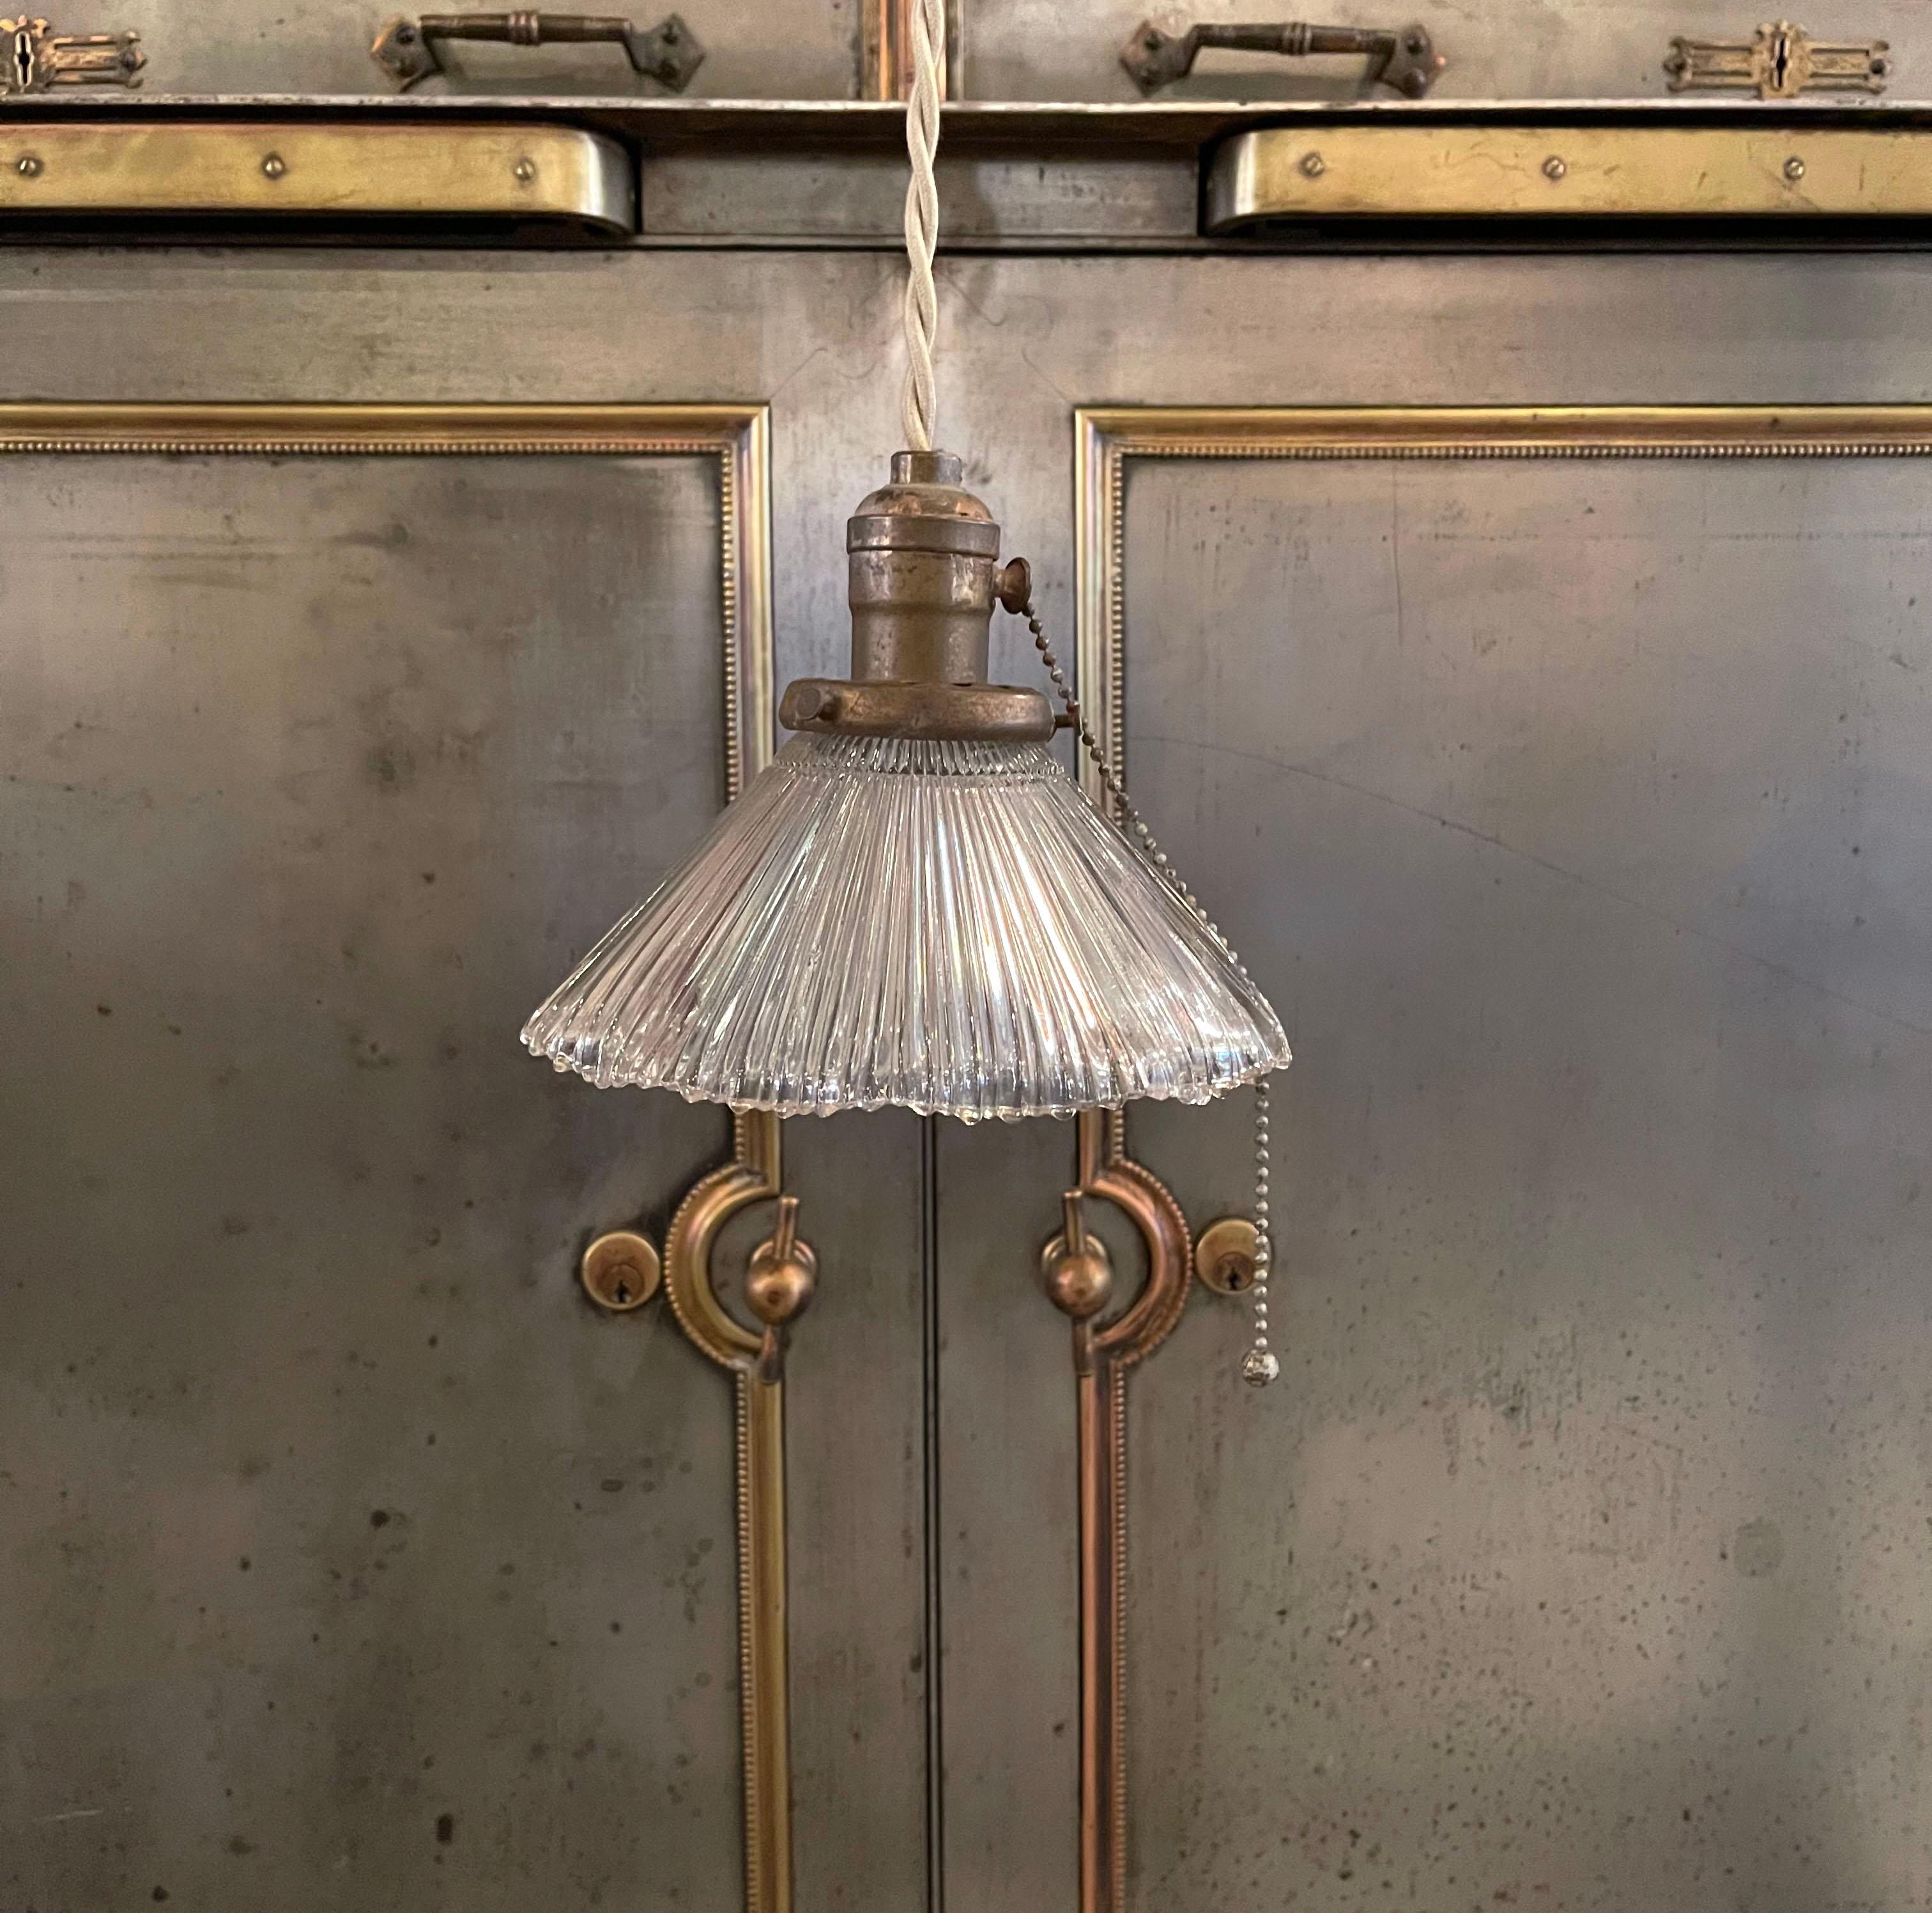 Petite, early 20th century pendant light with fluted glass shade with ruffled edge and brass pull chain hardware is newly wired with tan braided cloth cord to hang 77.25 inches overall.